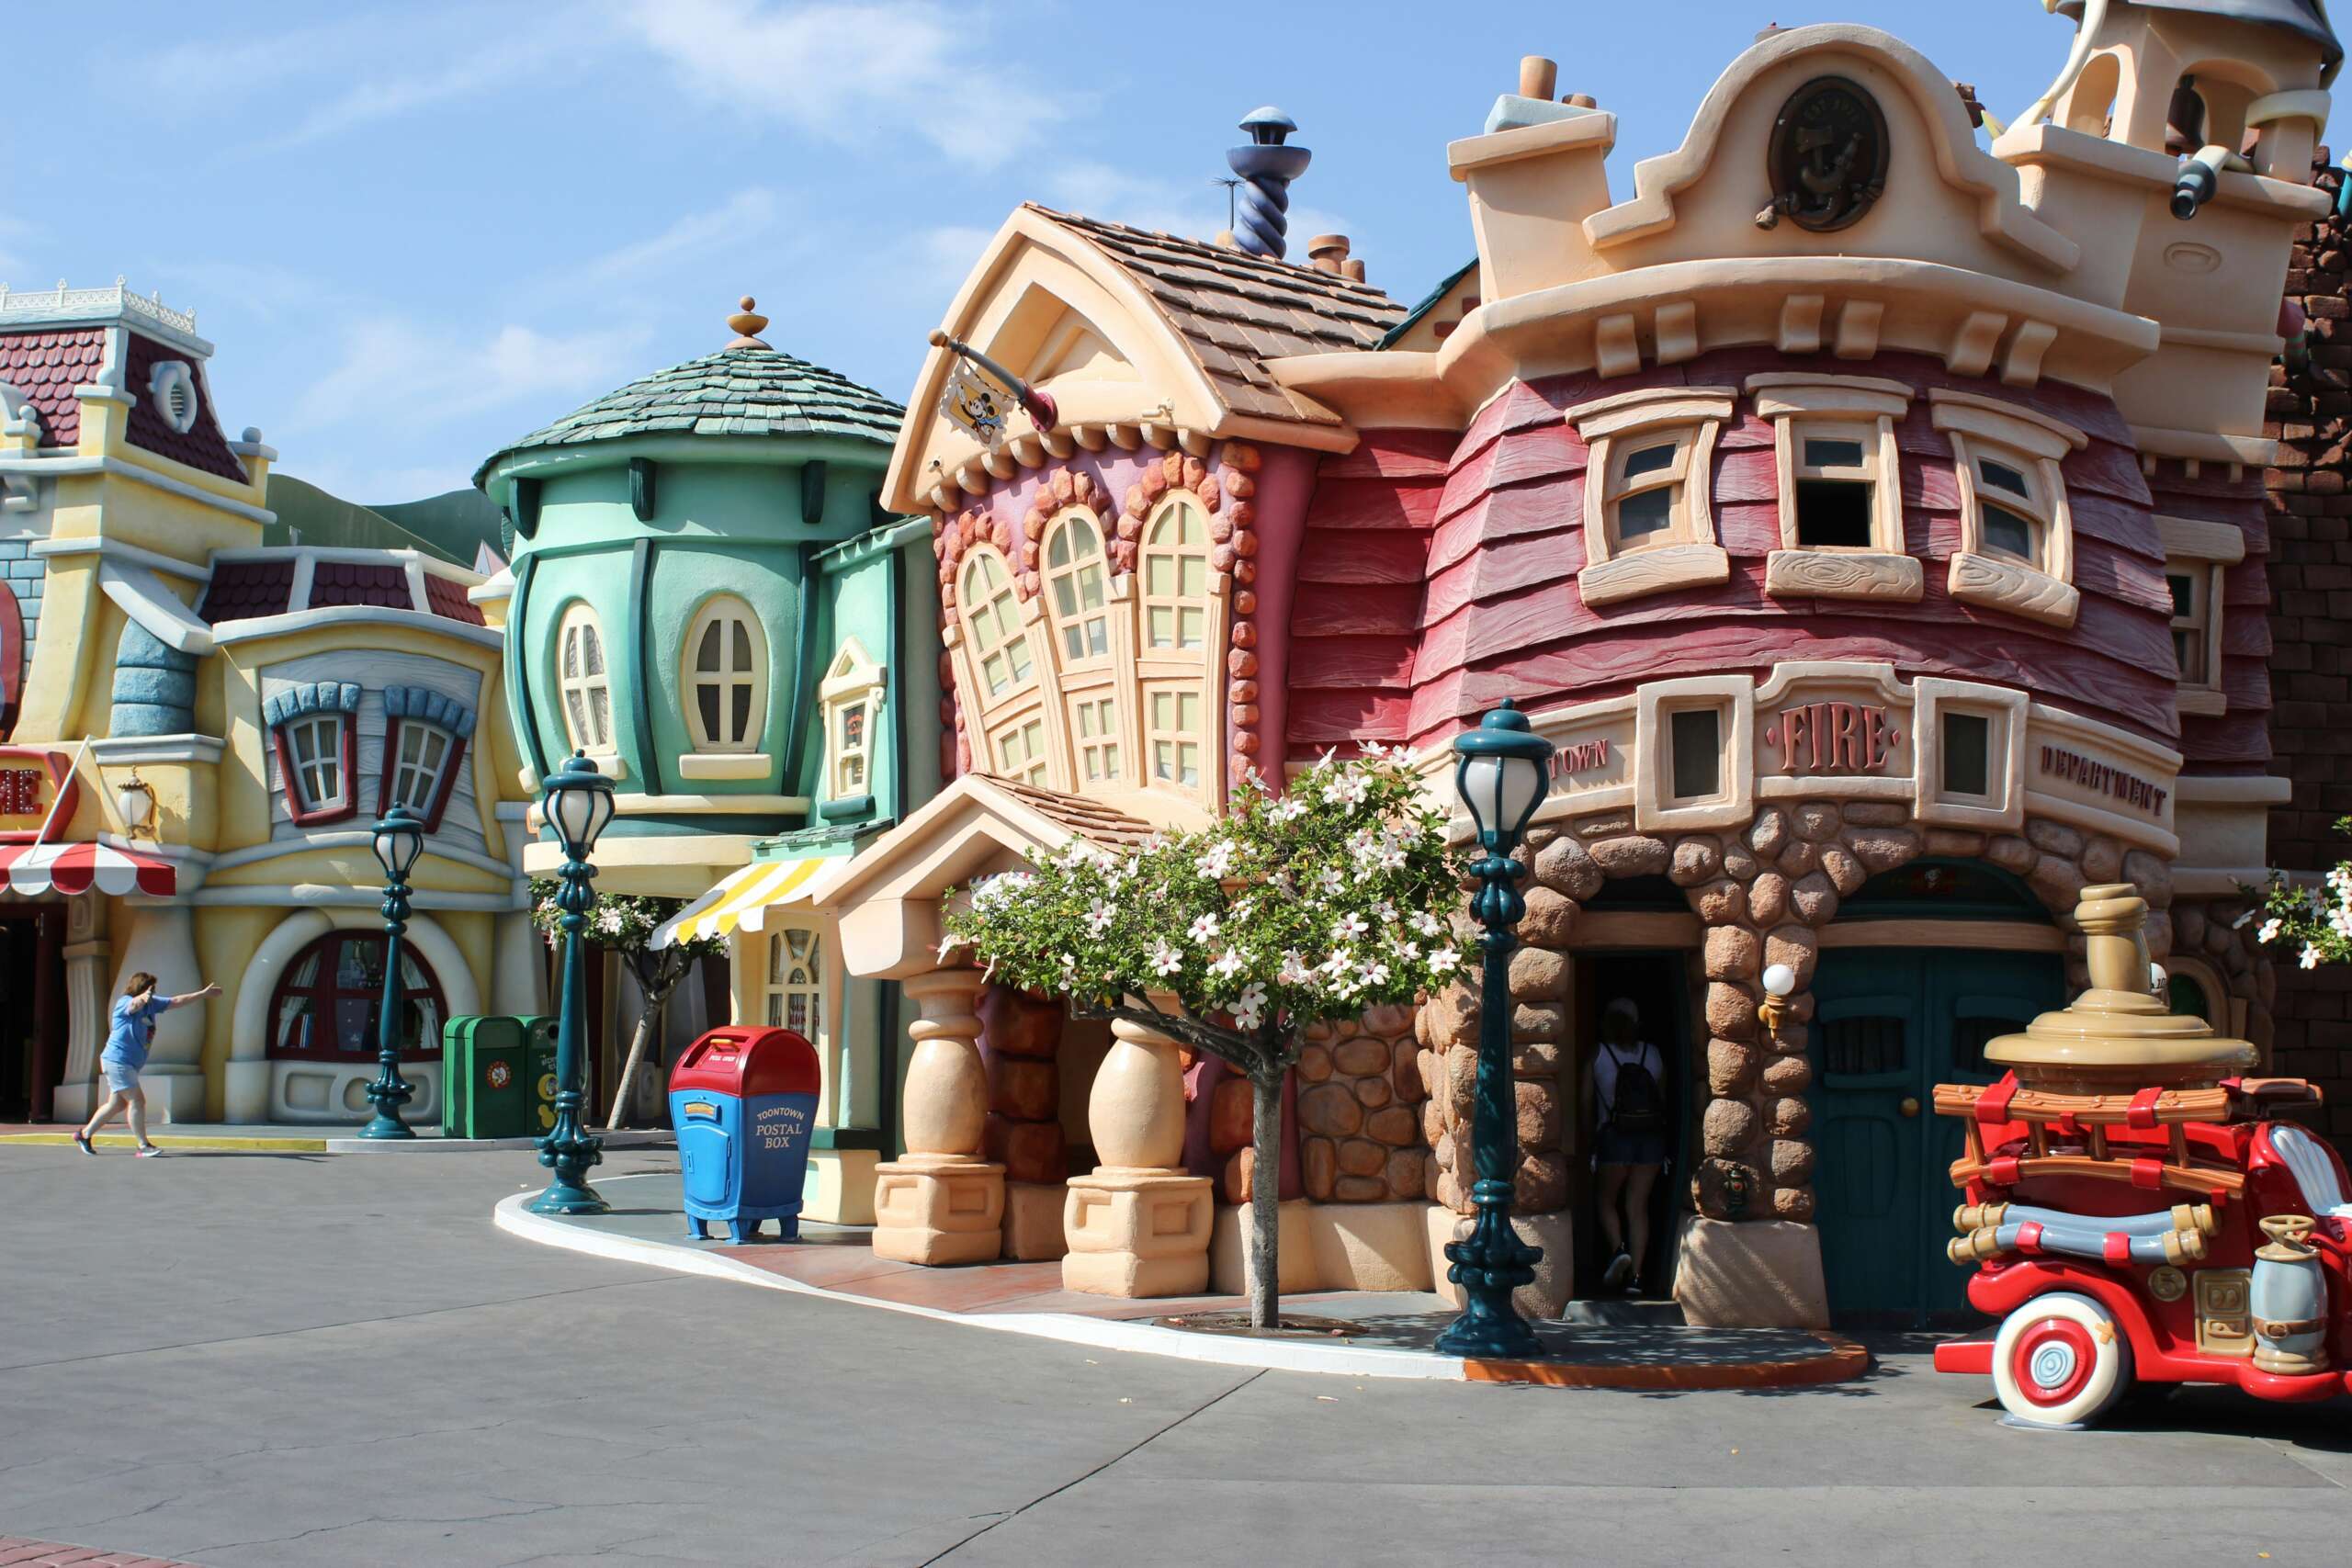 An image of a park located within Disneyland.